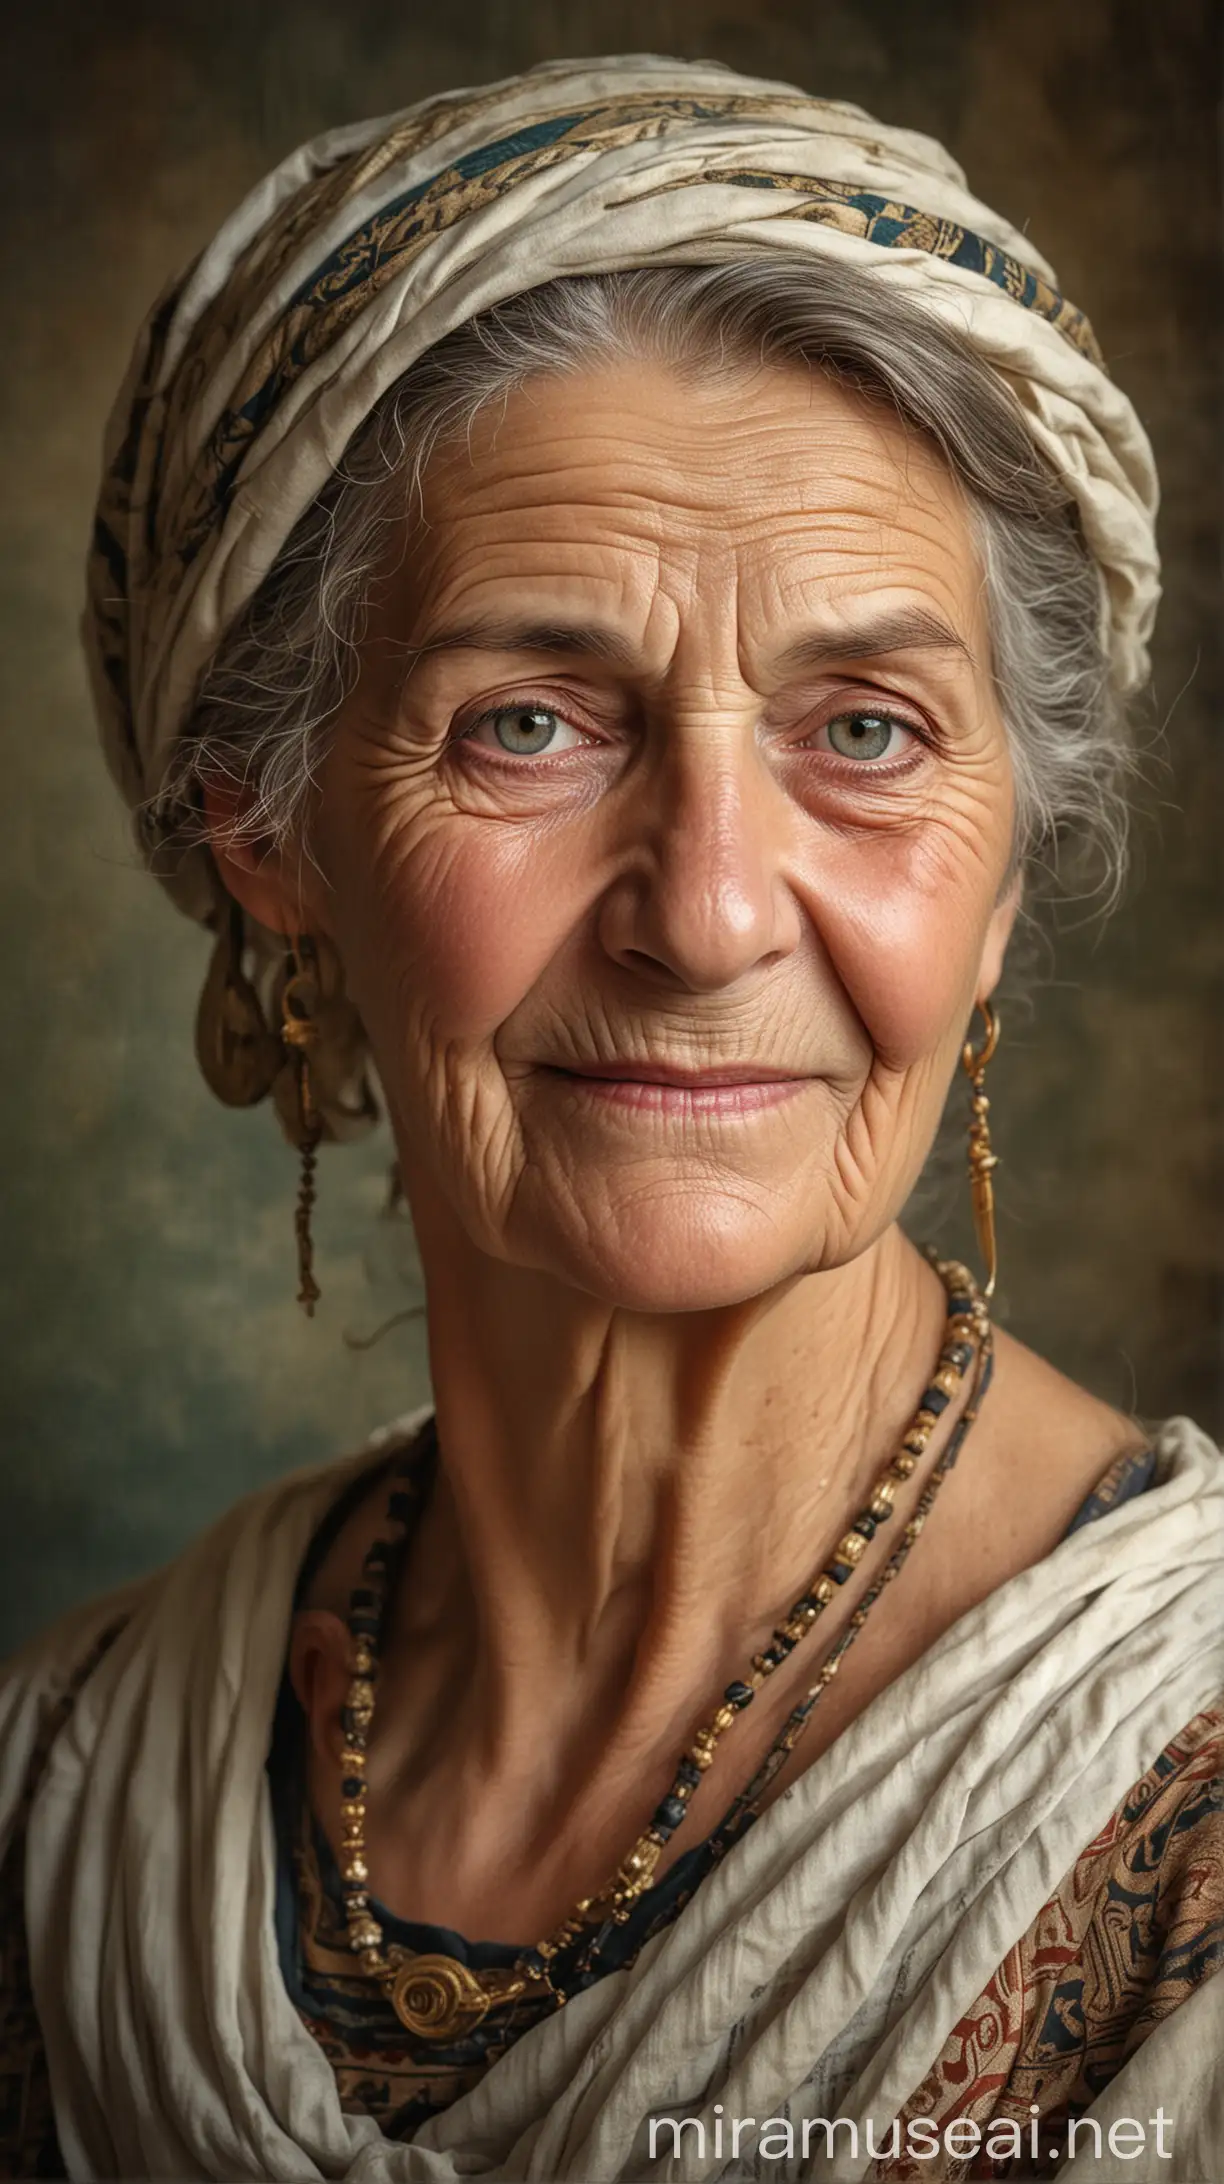 A portrait of an elderly woman with a gentle expression, dressed in traditional ancient Greek clothing, with a subtle smile and a hint of wisdom in her eyes."In ancient Jew